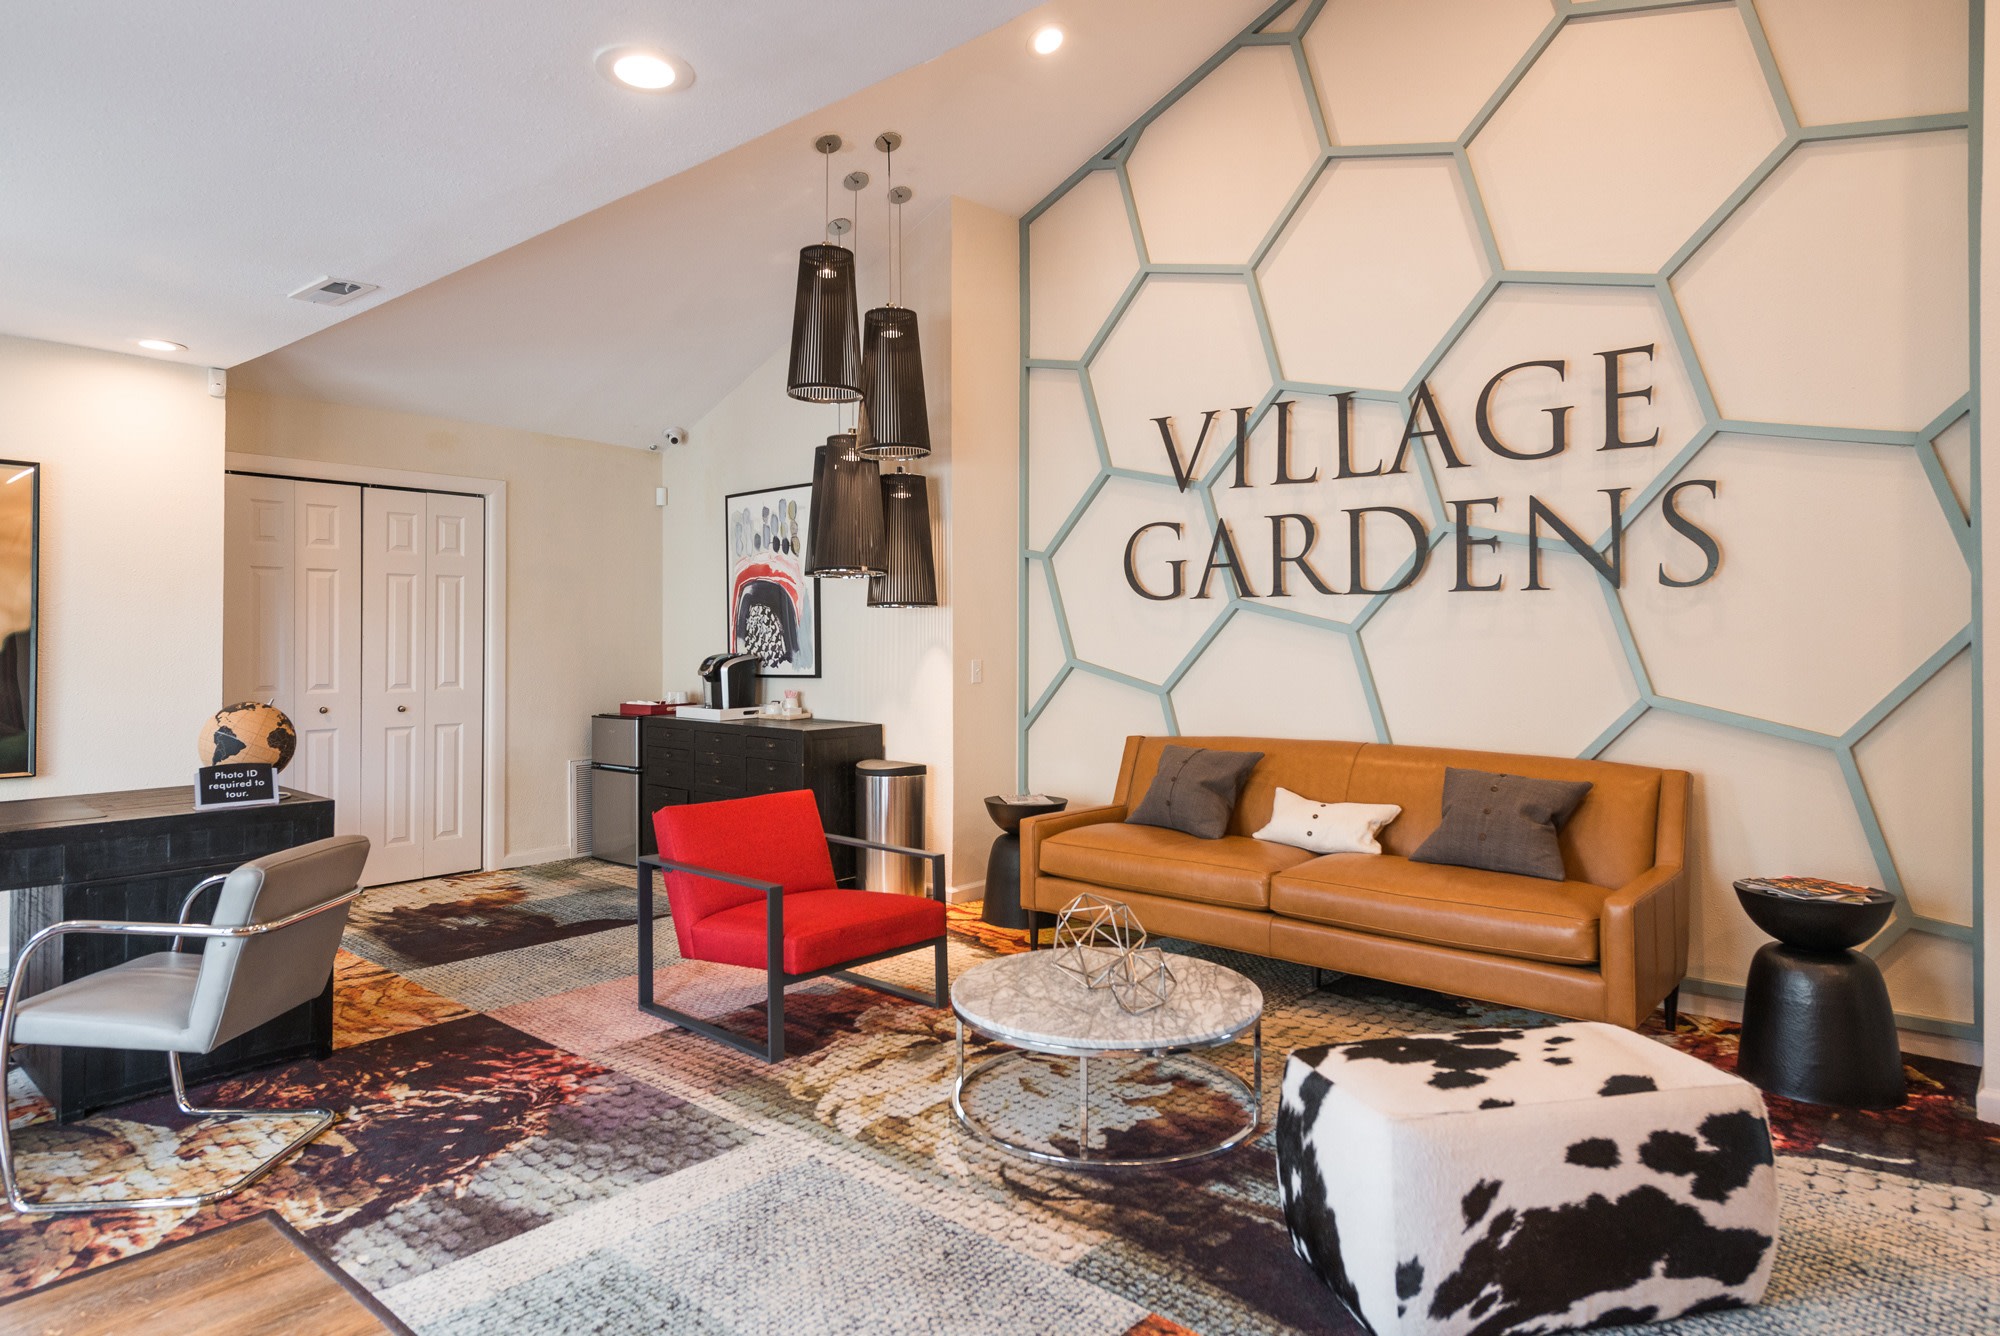 Village Gardens Fort Collins Co Apartments For Rent